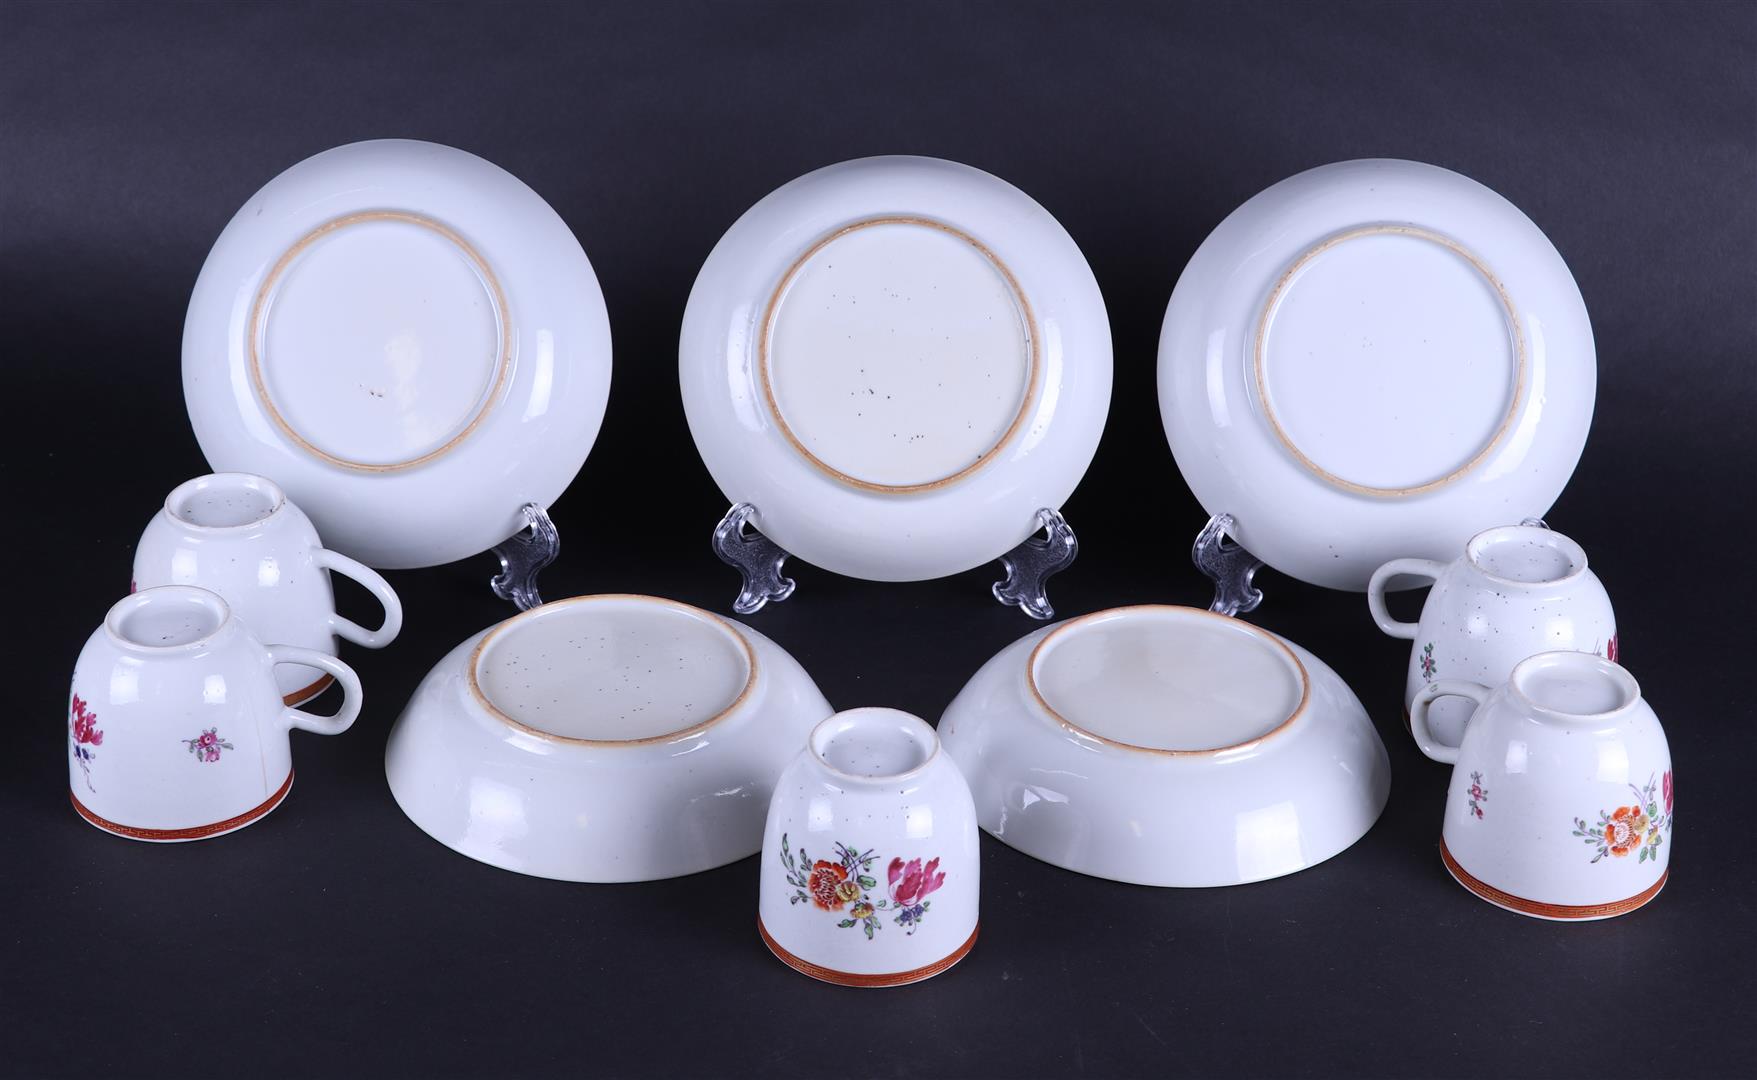 A set of  (5) porcelain Famile Rose cups and saucers. China, 18th century. - Image 2 of 3